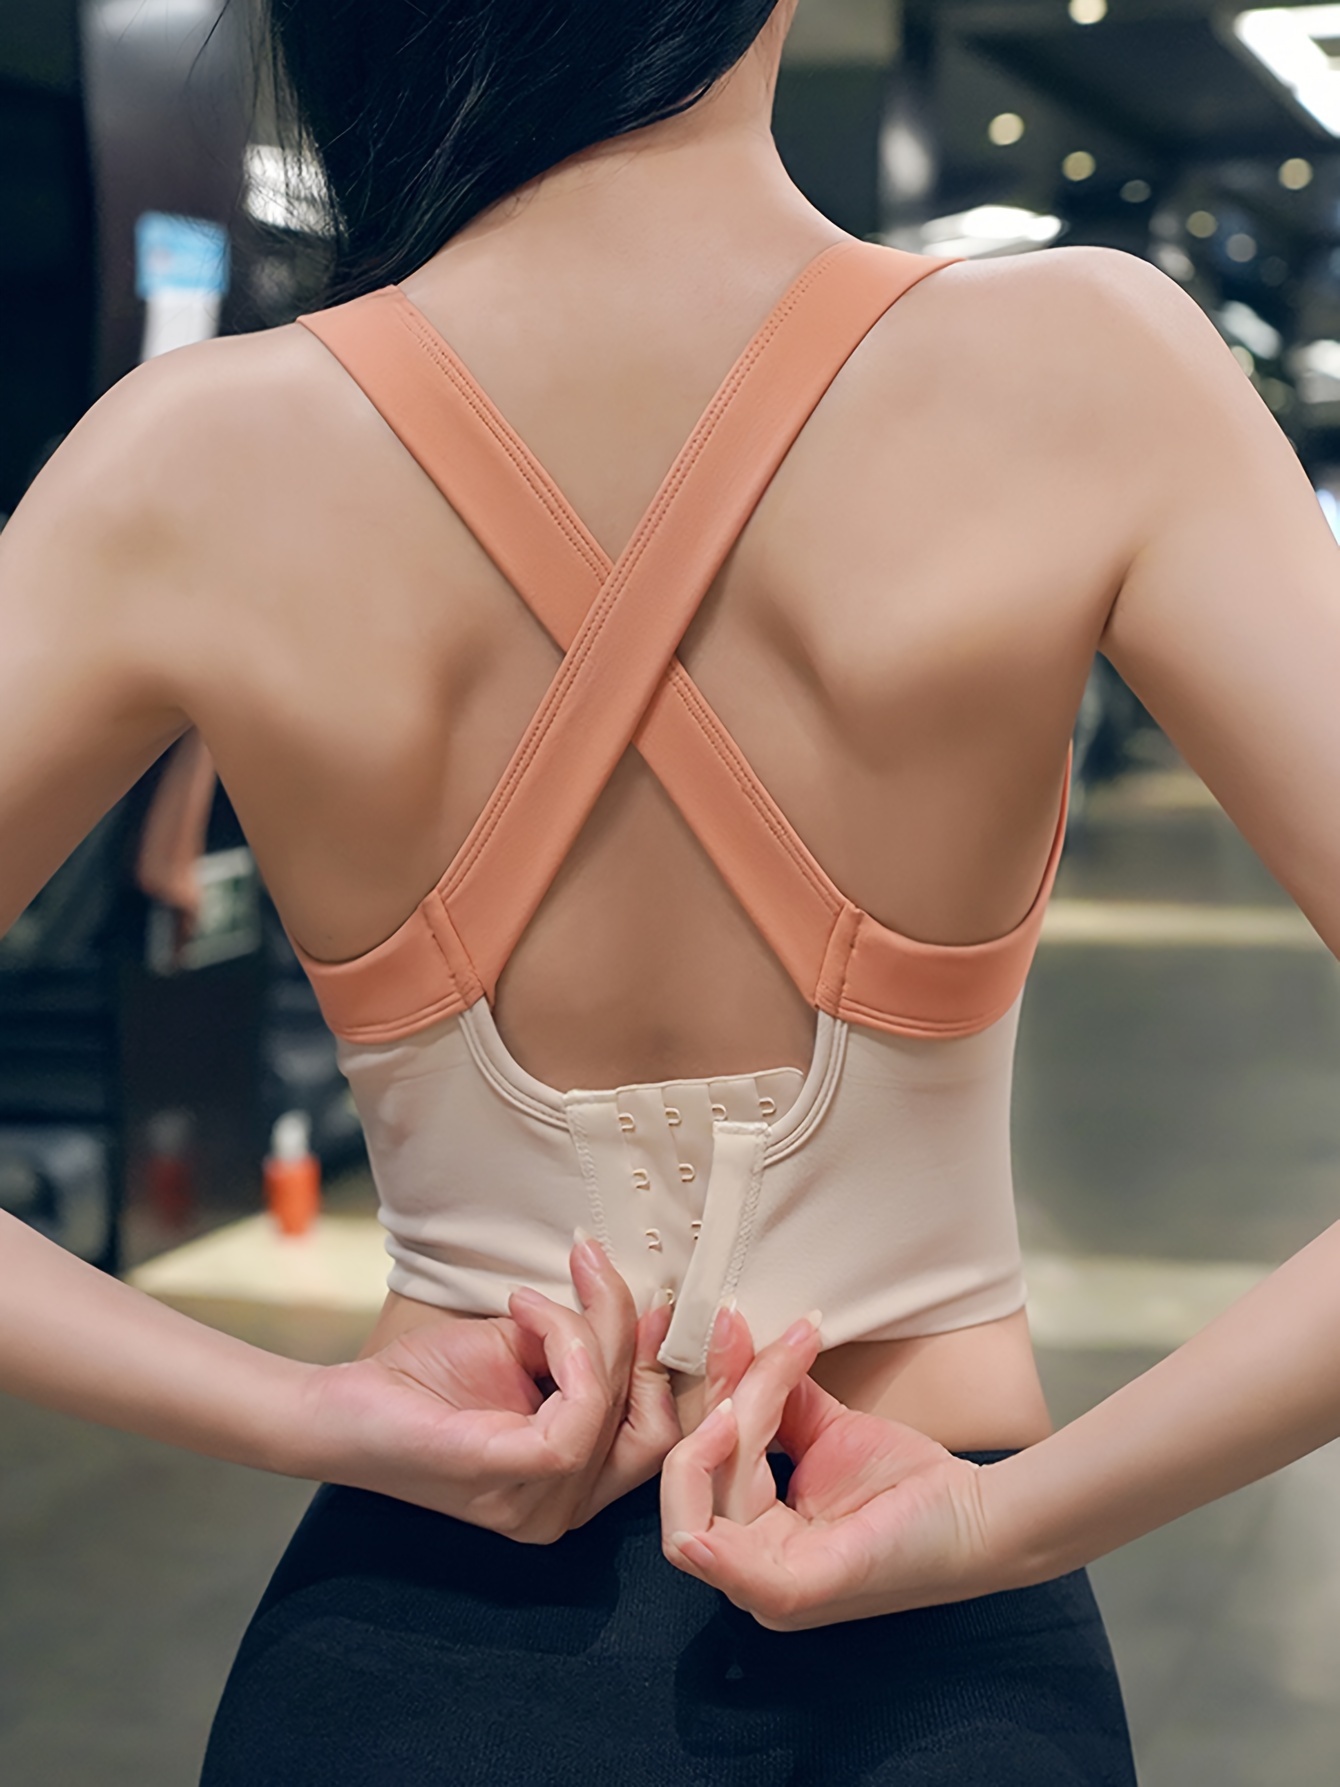 Runner's Bra: High Impact Support with Unique Strap Design